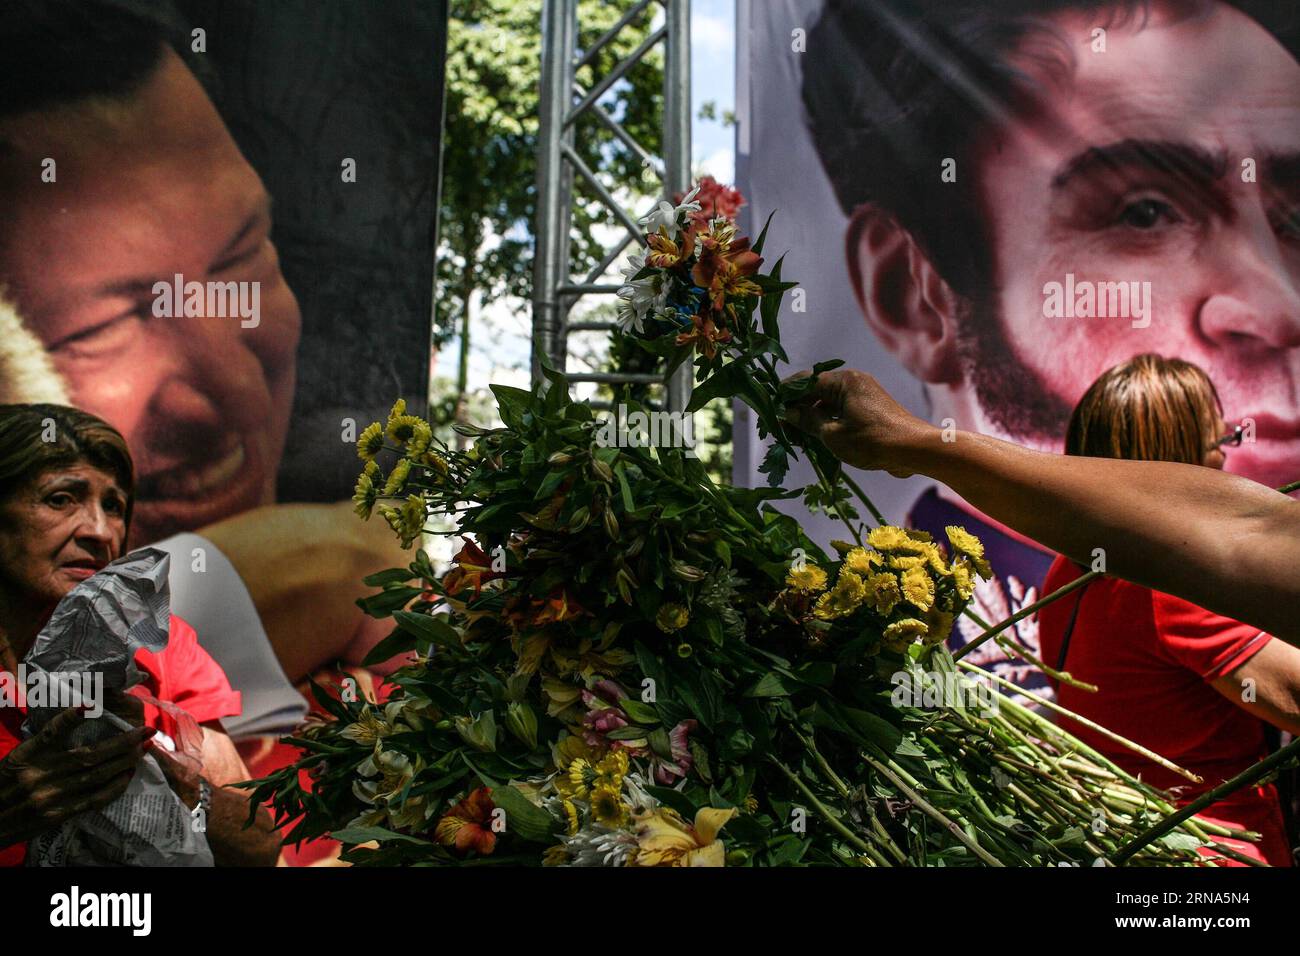 (160107) -- CARACAS, Jan. 7, 2016 -- Members of social movements lay a wreath in front of the images of Simon Bolivar, the founding father of Venezuelan Independence, and late Venezuelan President Hugo Chavez, during a rally held by members of social movements to reject the removal of images of Simon Bolivar and late Venezuelan President Hugo Chavez from the National Assembly, around the Plaza Bolivar in Caracas, Venezuela, on Jan. 7, 2016. Boris Vergara) (jg) (fnc) VENEZUELA-CARACAS-RALLY e BorisxVergara PUBLICATIONxNOTxINxCHN   160107 Caracas Jan 7 2016 Members of Social Movements Lay a Wrea Stock Photo